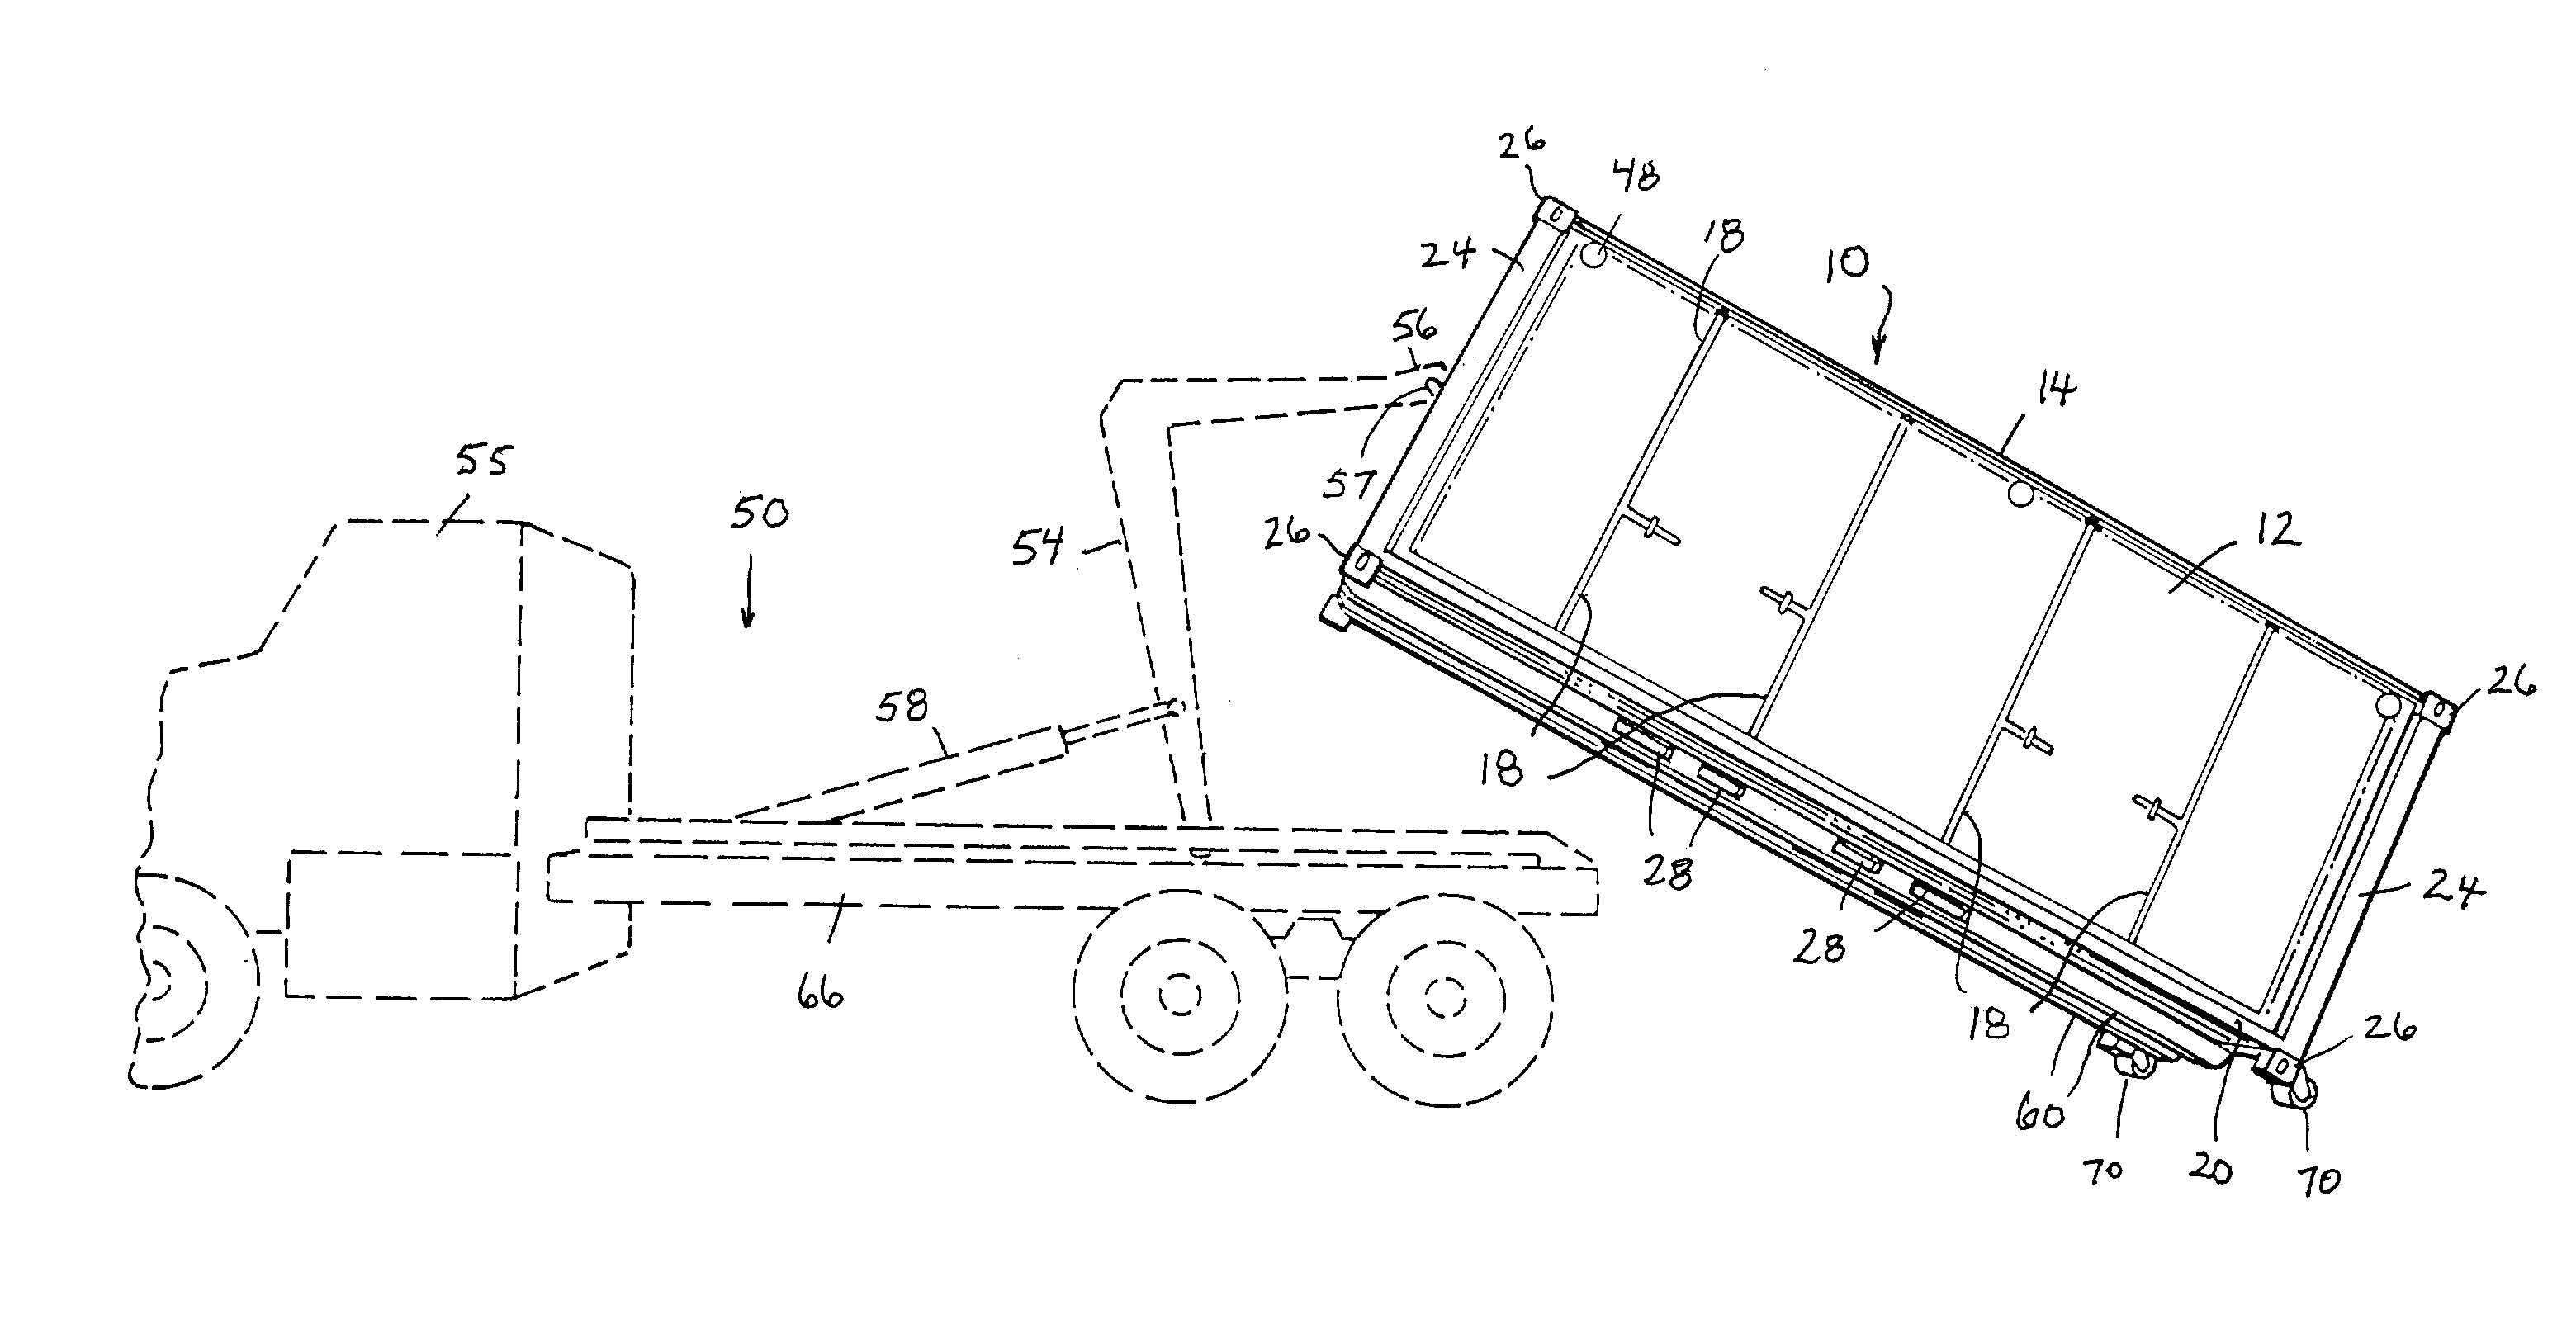 Collapsible containerized shelter transportable by self-loading vehicles